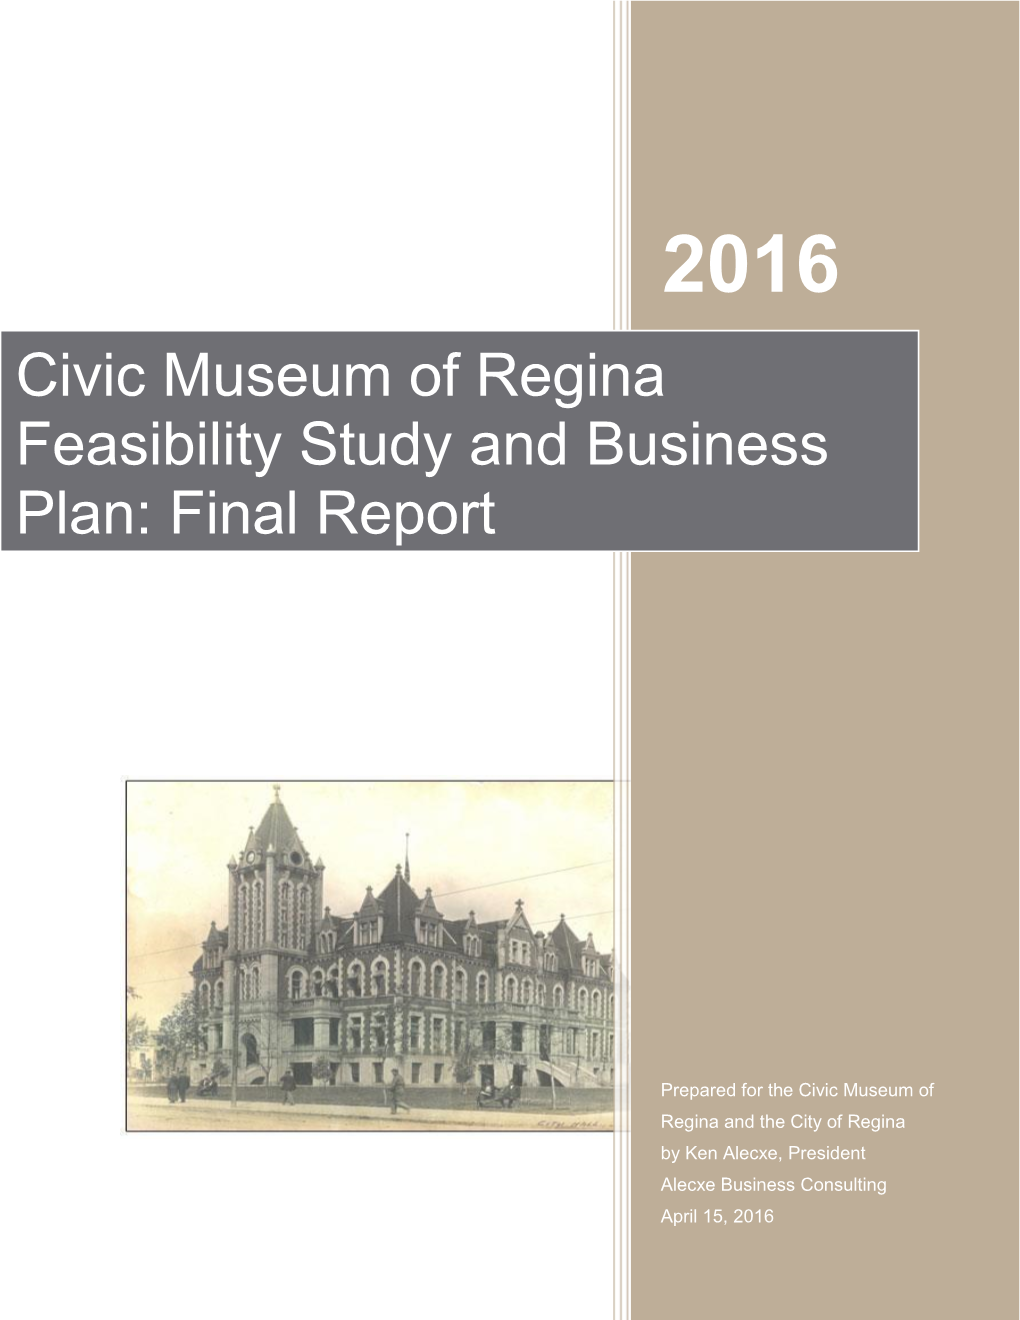 Civic Museum of Regina Feasibility Study and Business Plan: Phase 1